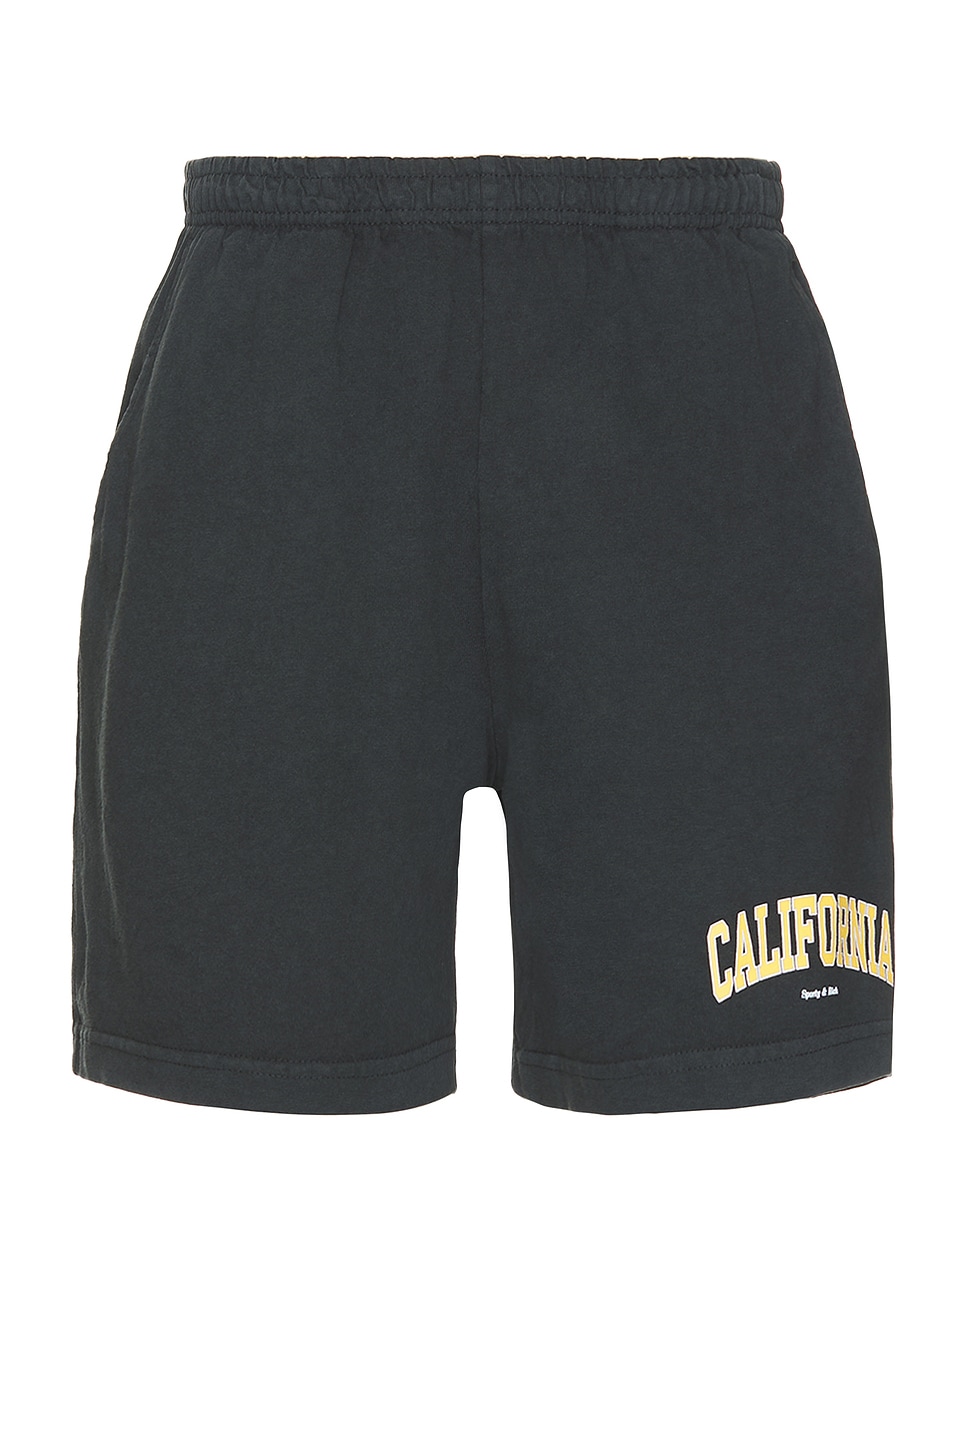 Image 1 of Sporty & Rich California Gym Shorts in Faded Black